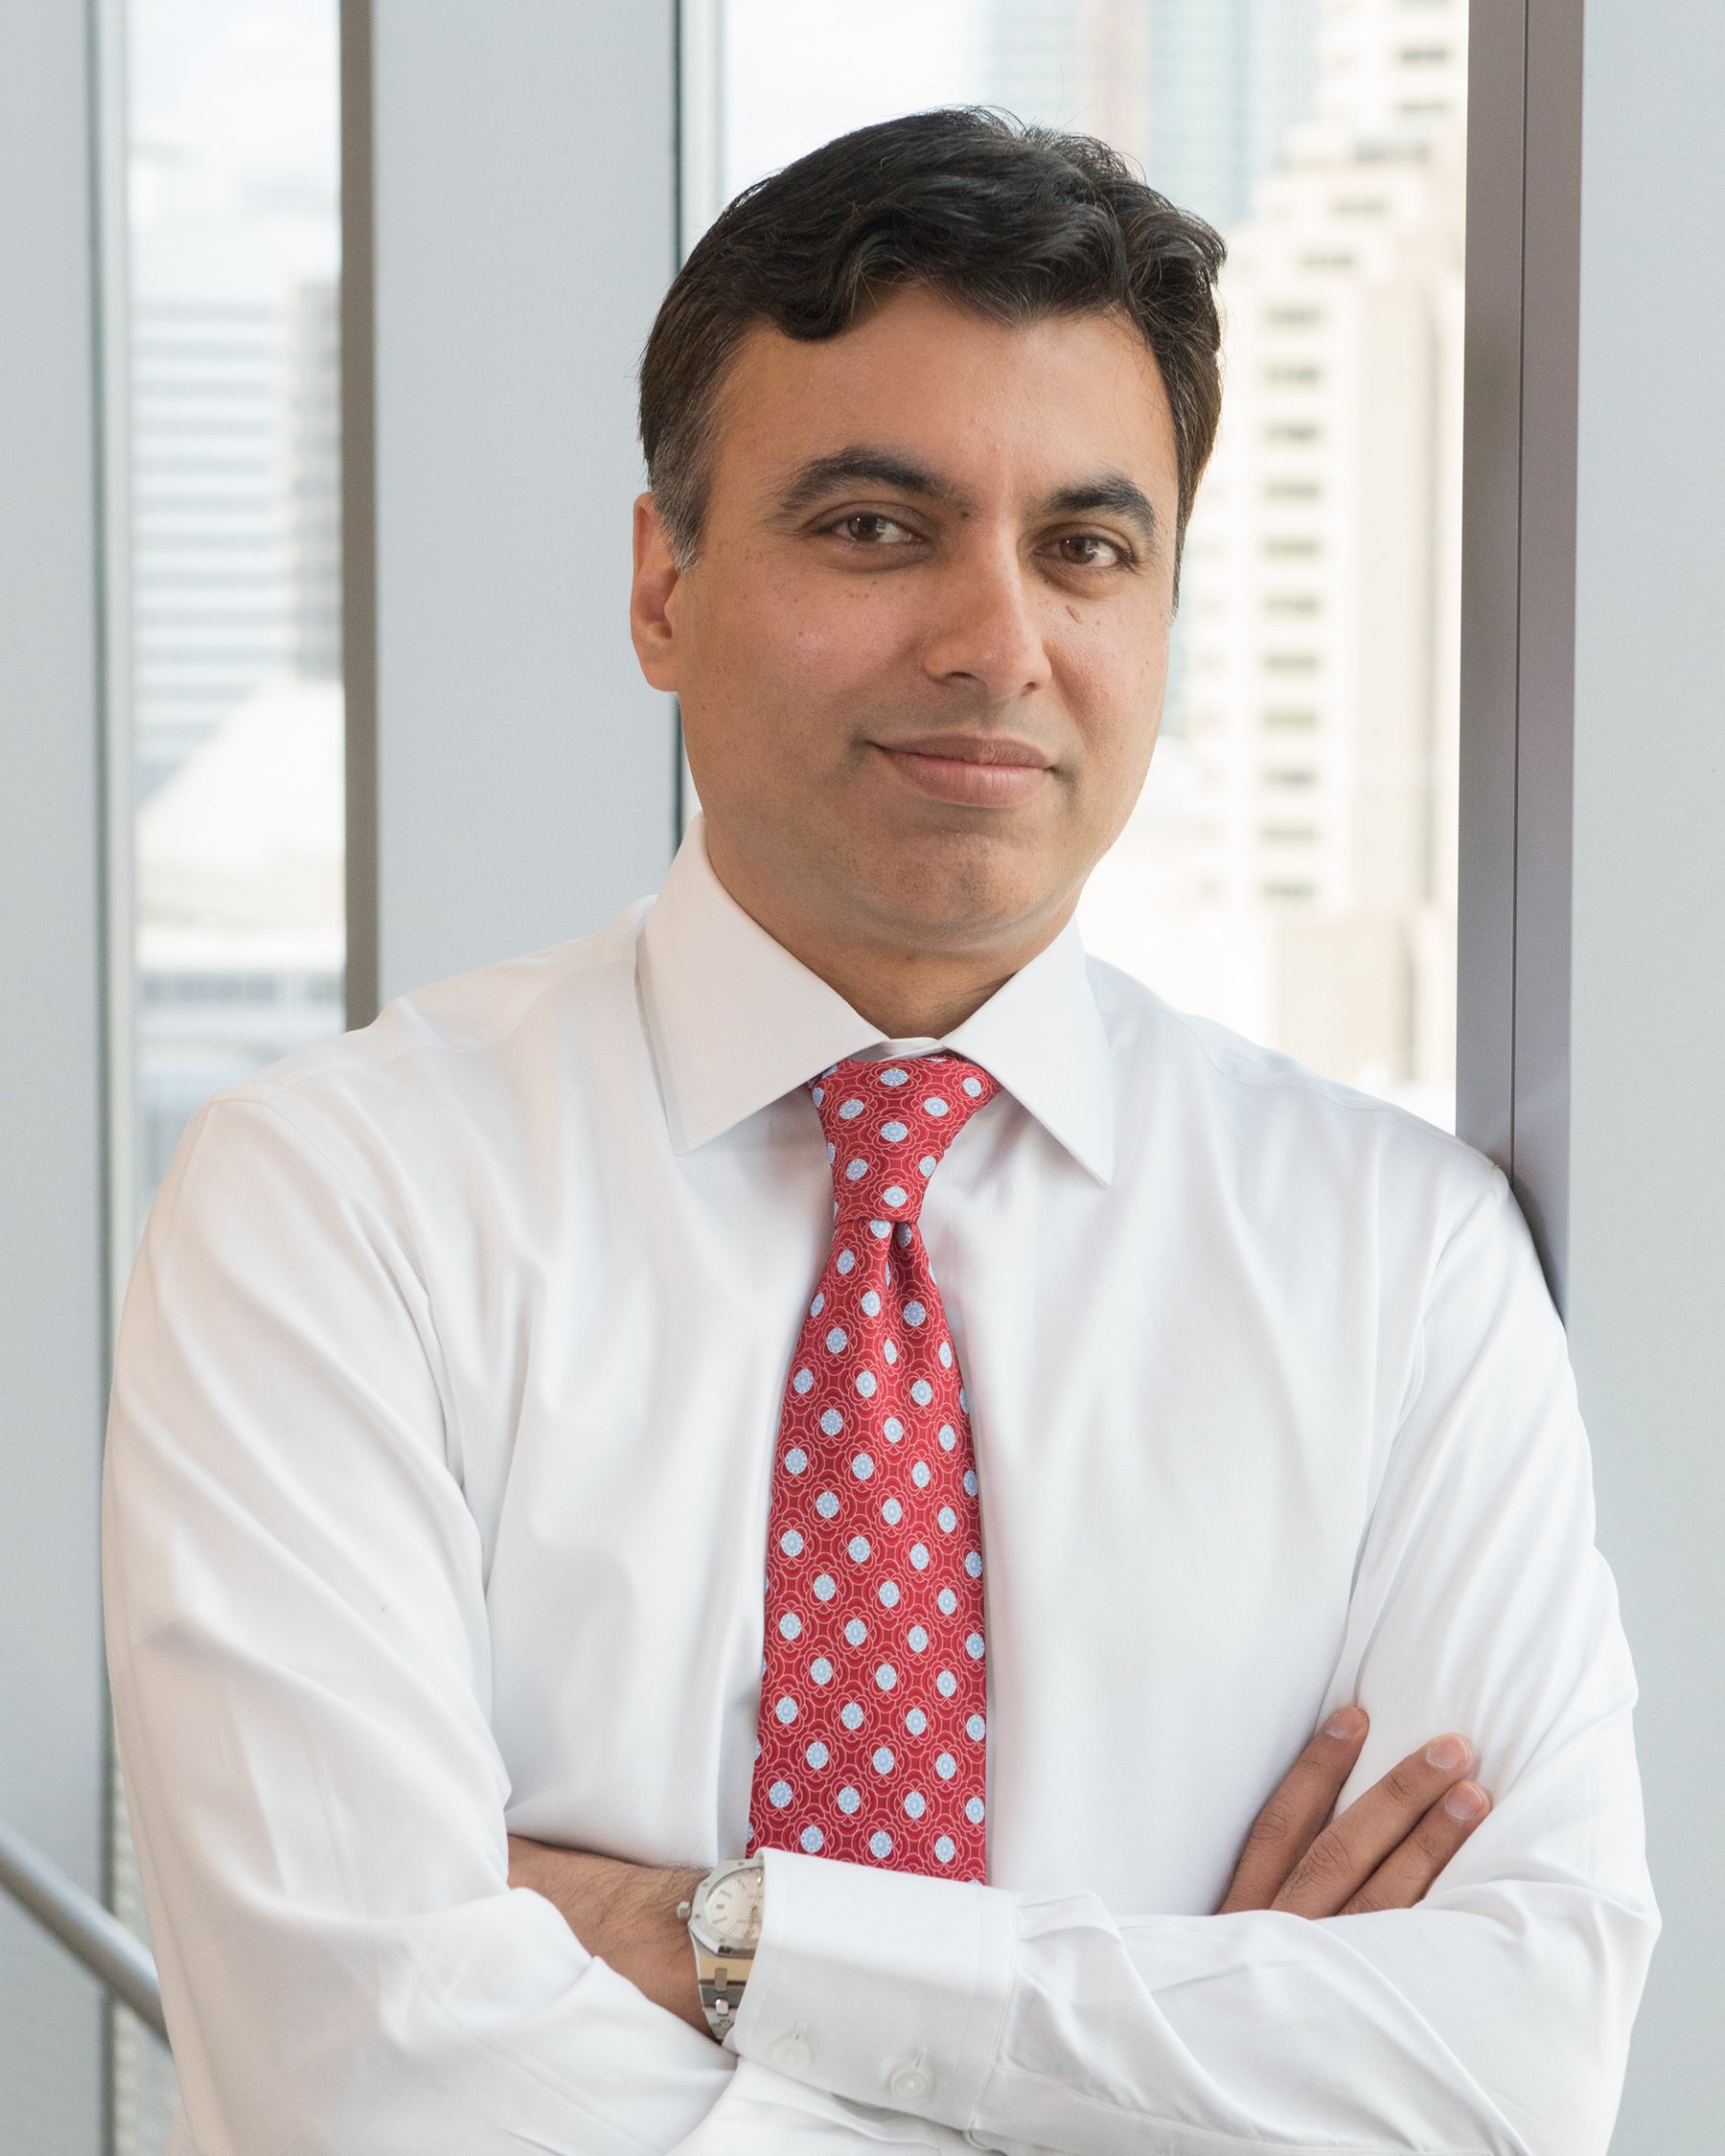 Marketwired Appoints Adnan Ahmed to President and CEO